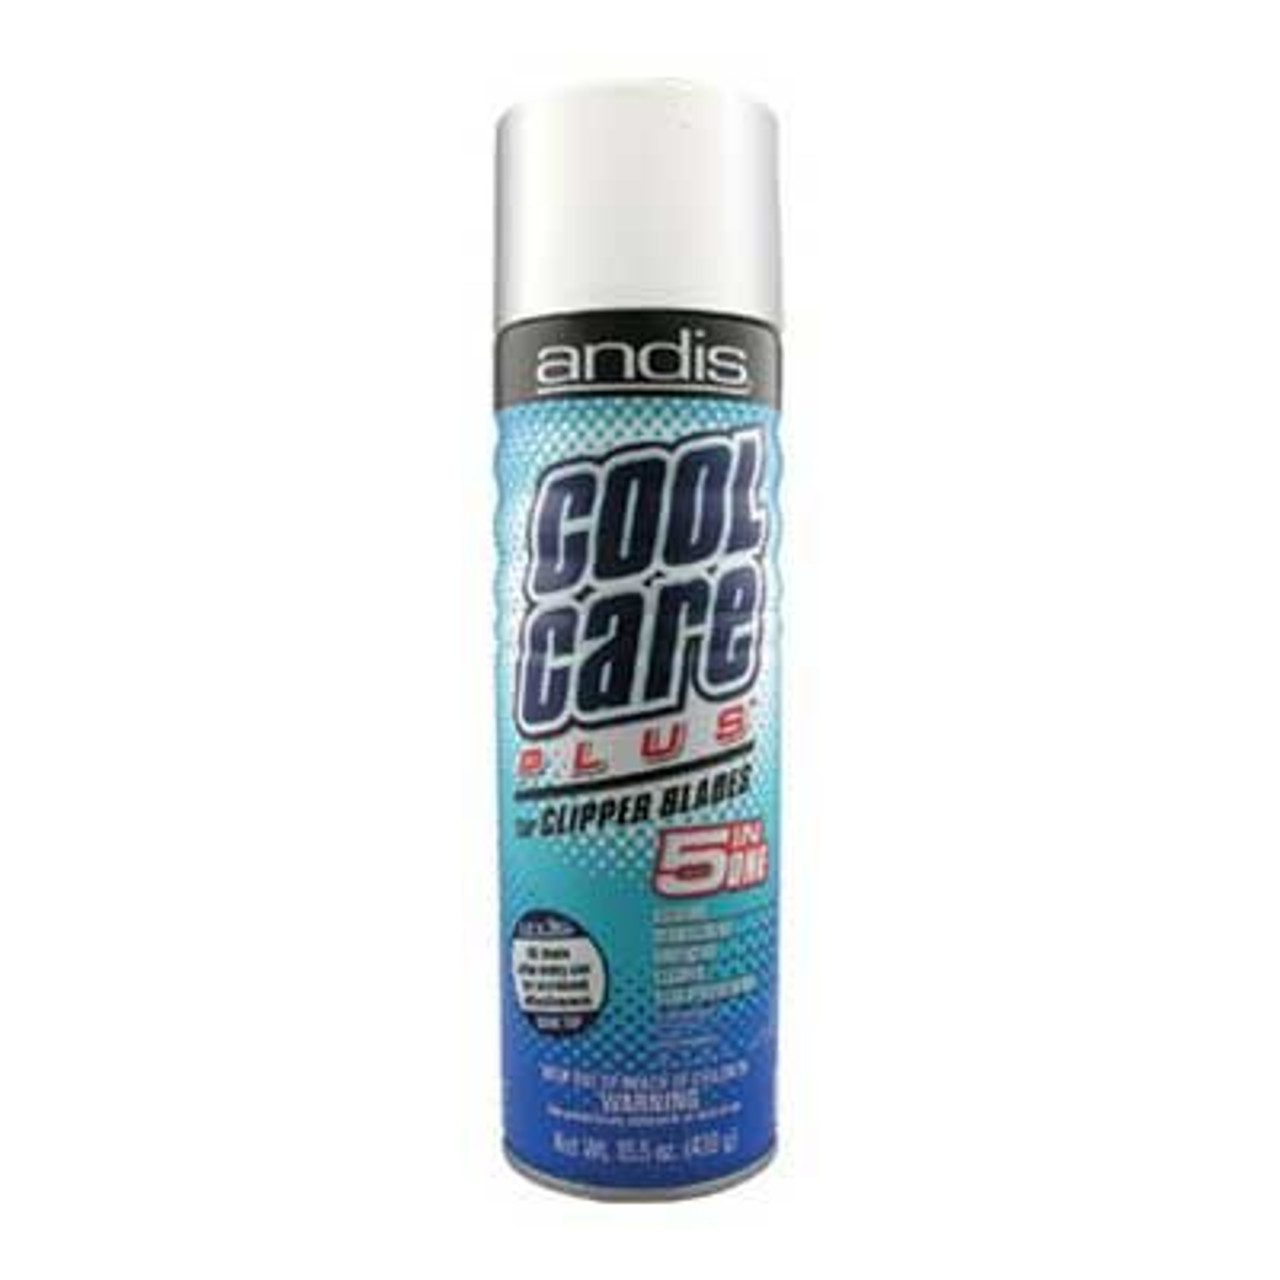 Andis Cool Care Plus Spray For Clipper Blades 15.5oz